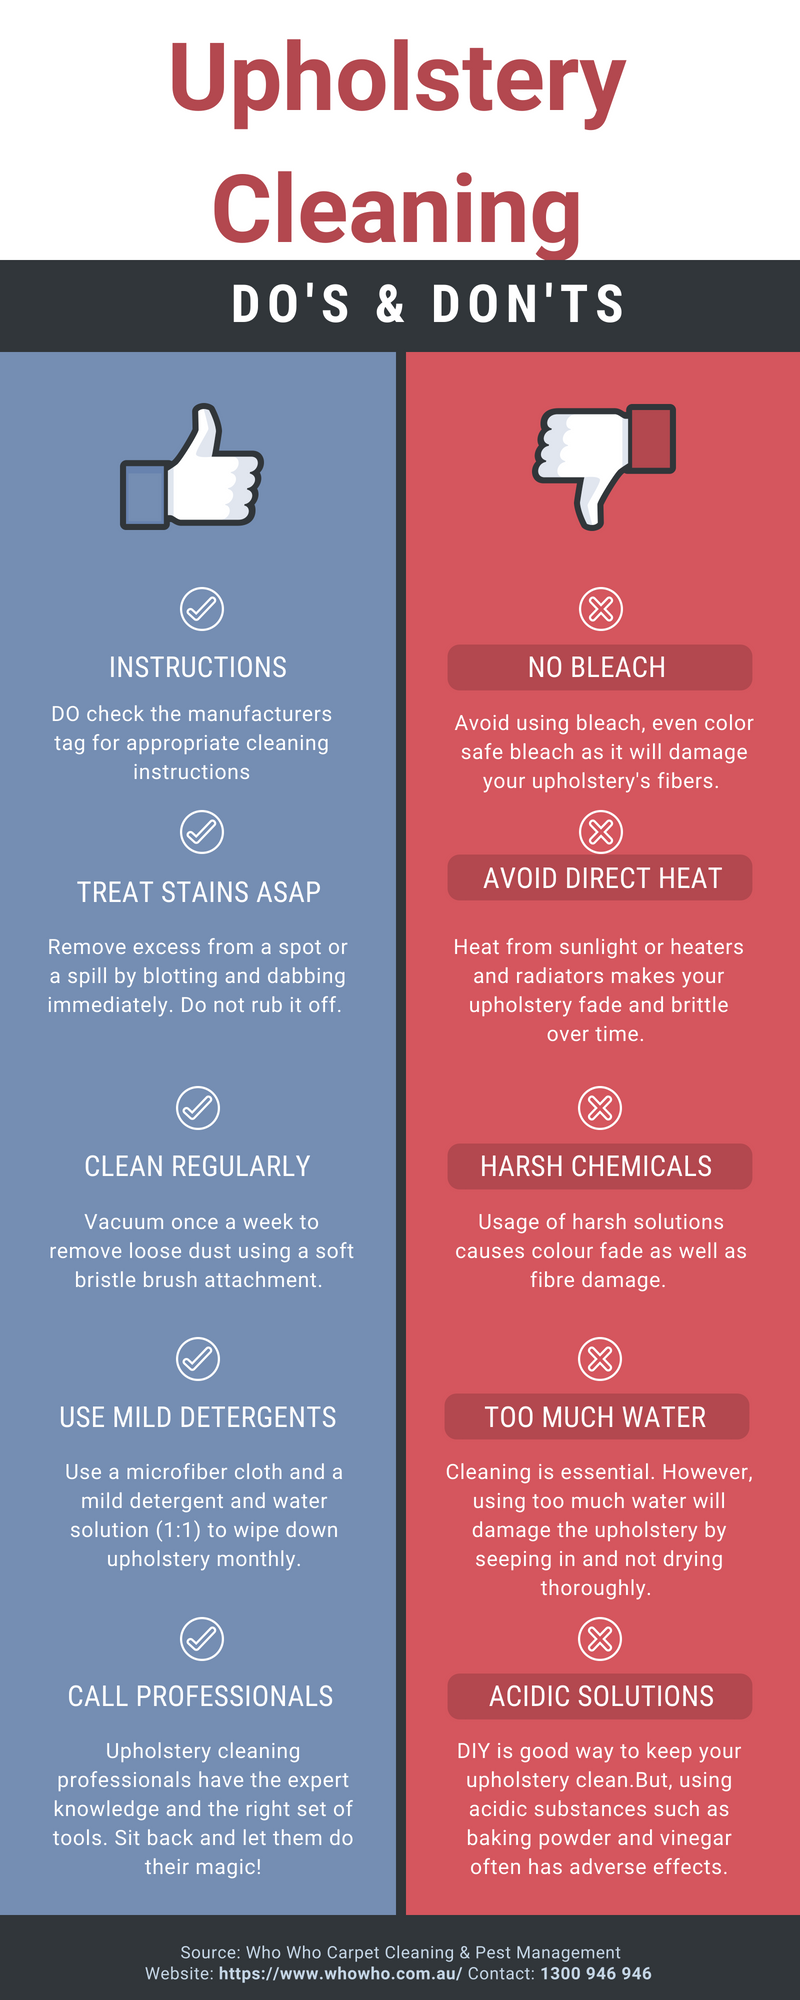 Upholstery Cleaning Brisbane, Do's and Dont's Infographic Red and Blue 